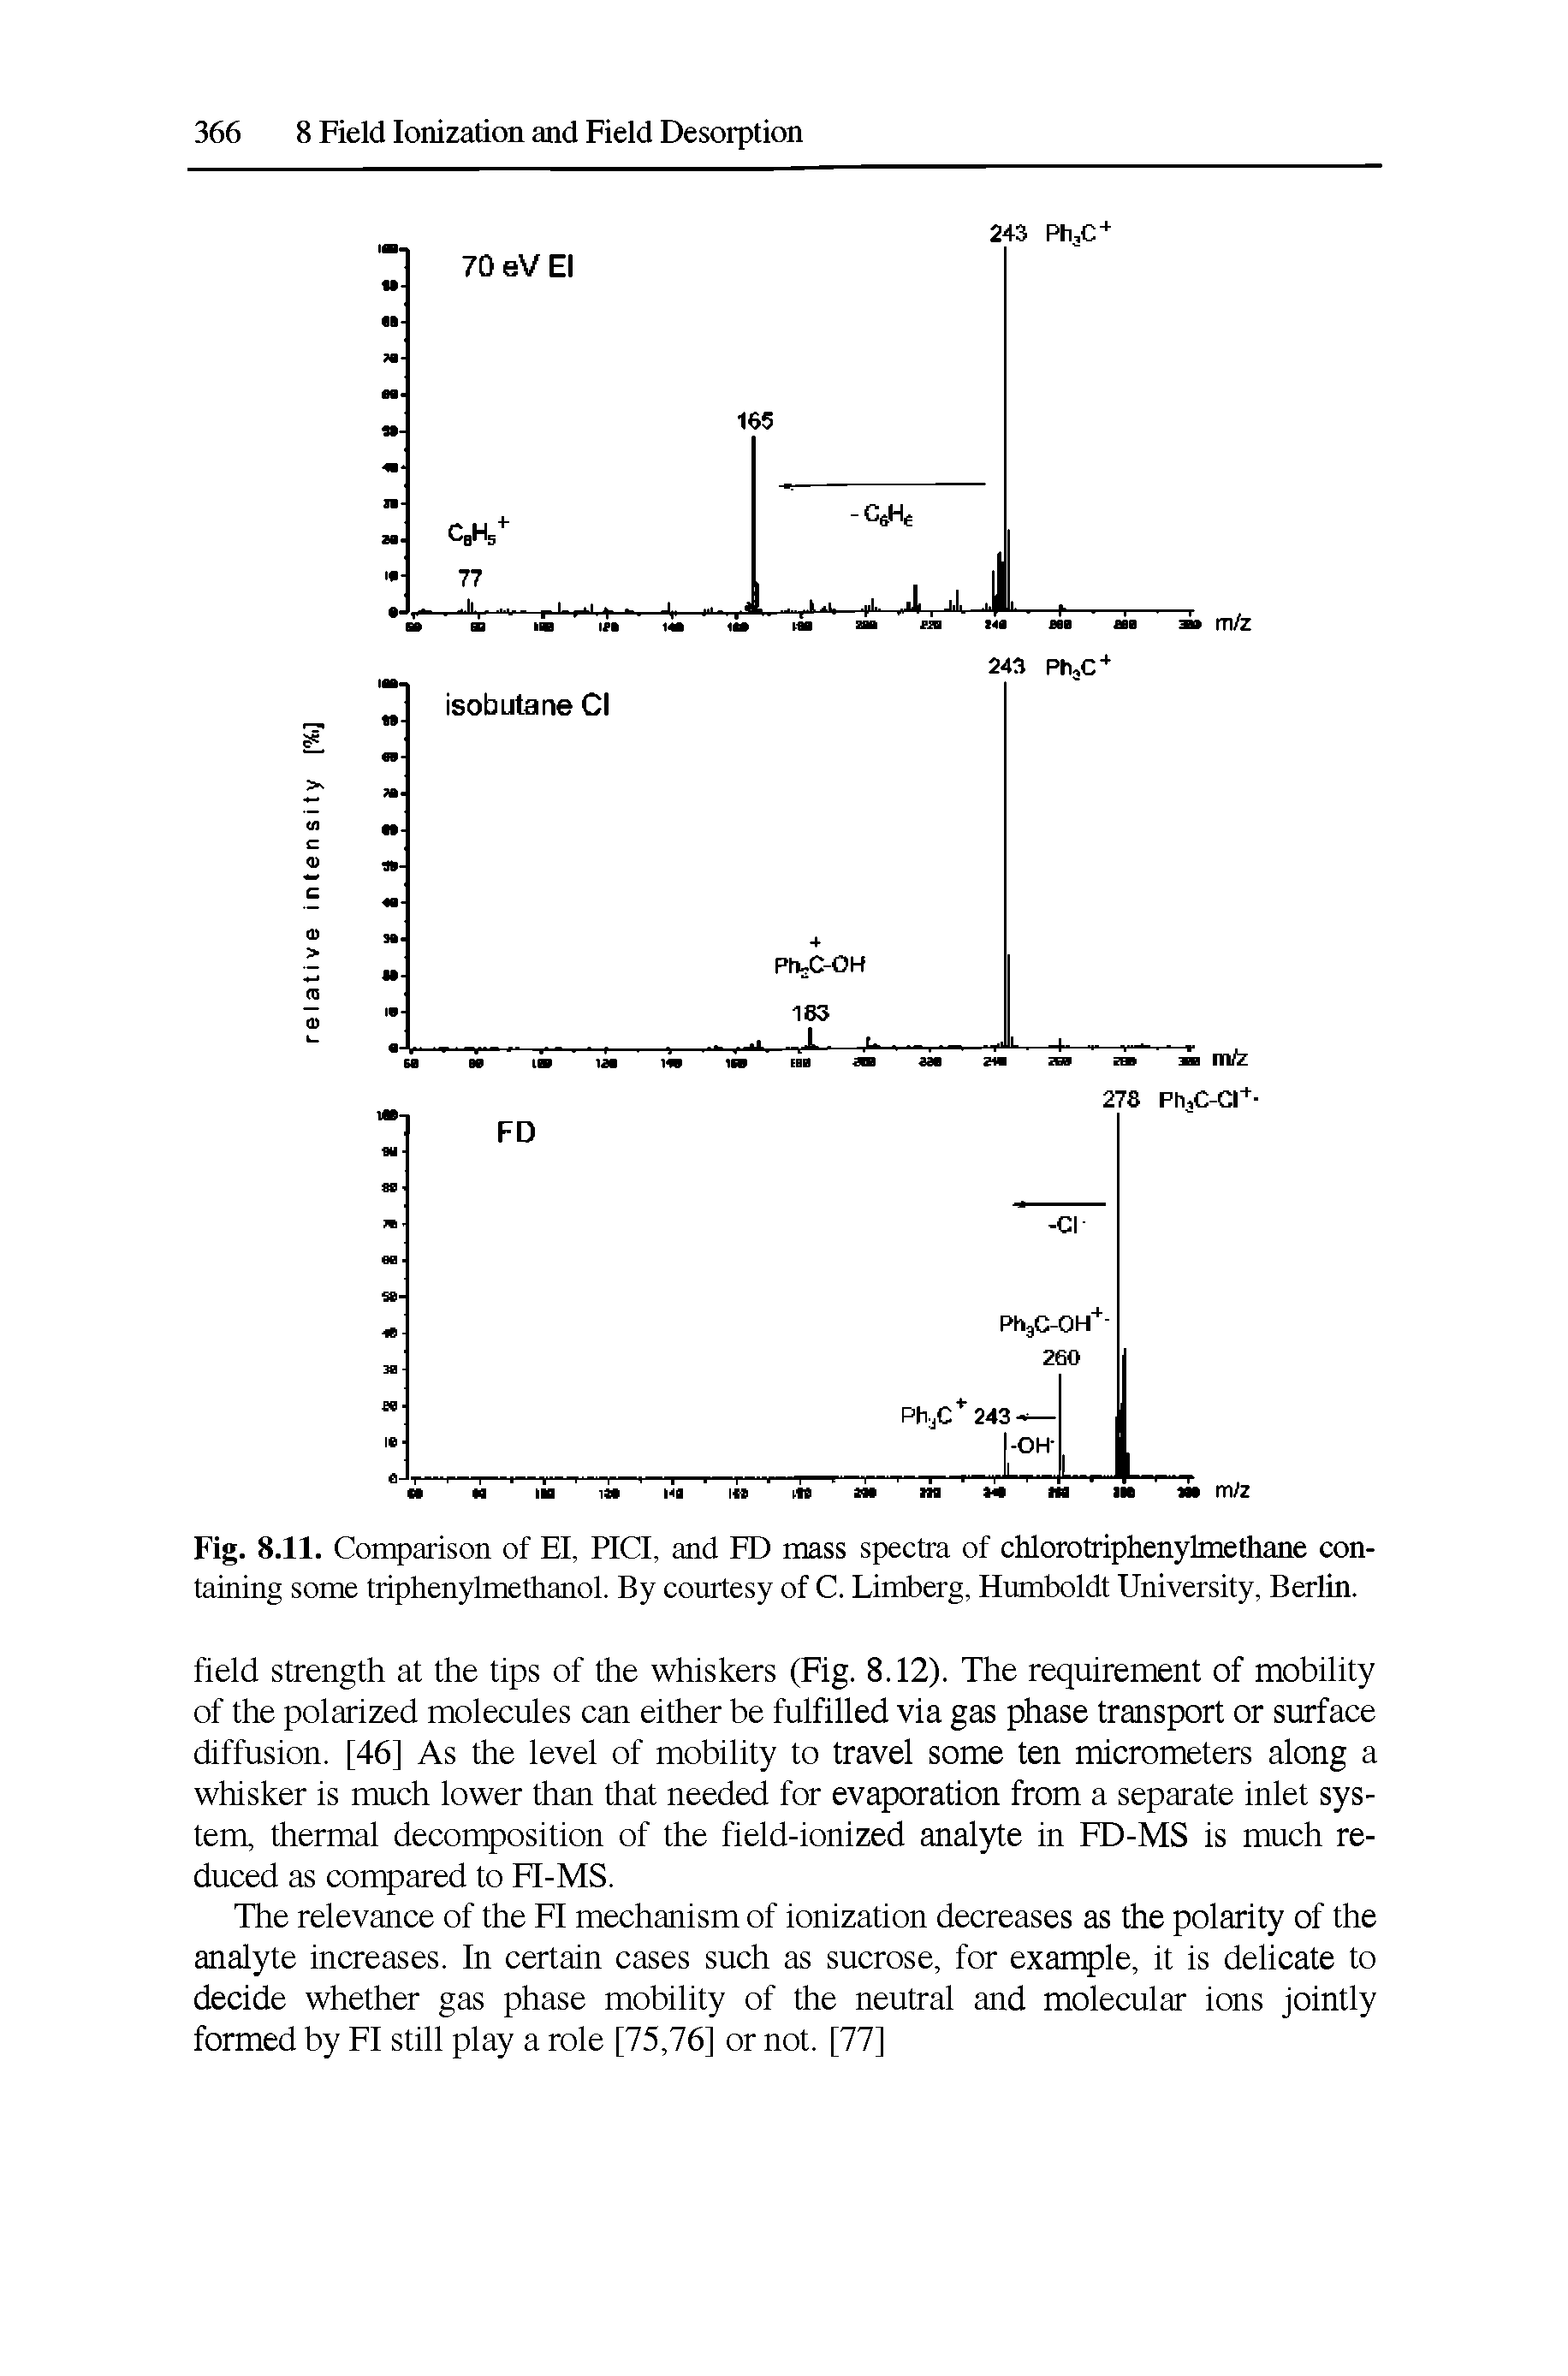 Fig. 8.11. Comparison of El, PICI, and FD mass spectra of chlorotriphenyknethane containing some triphenylmethanol. By courtesy of C. Limberg, Humboldt University, Berlin.